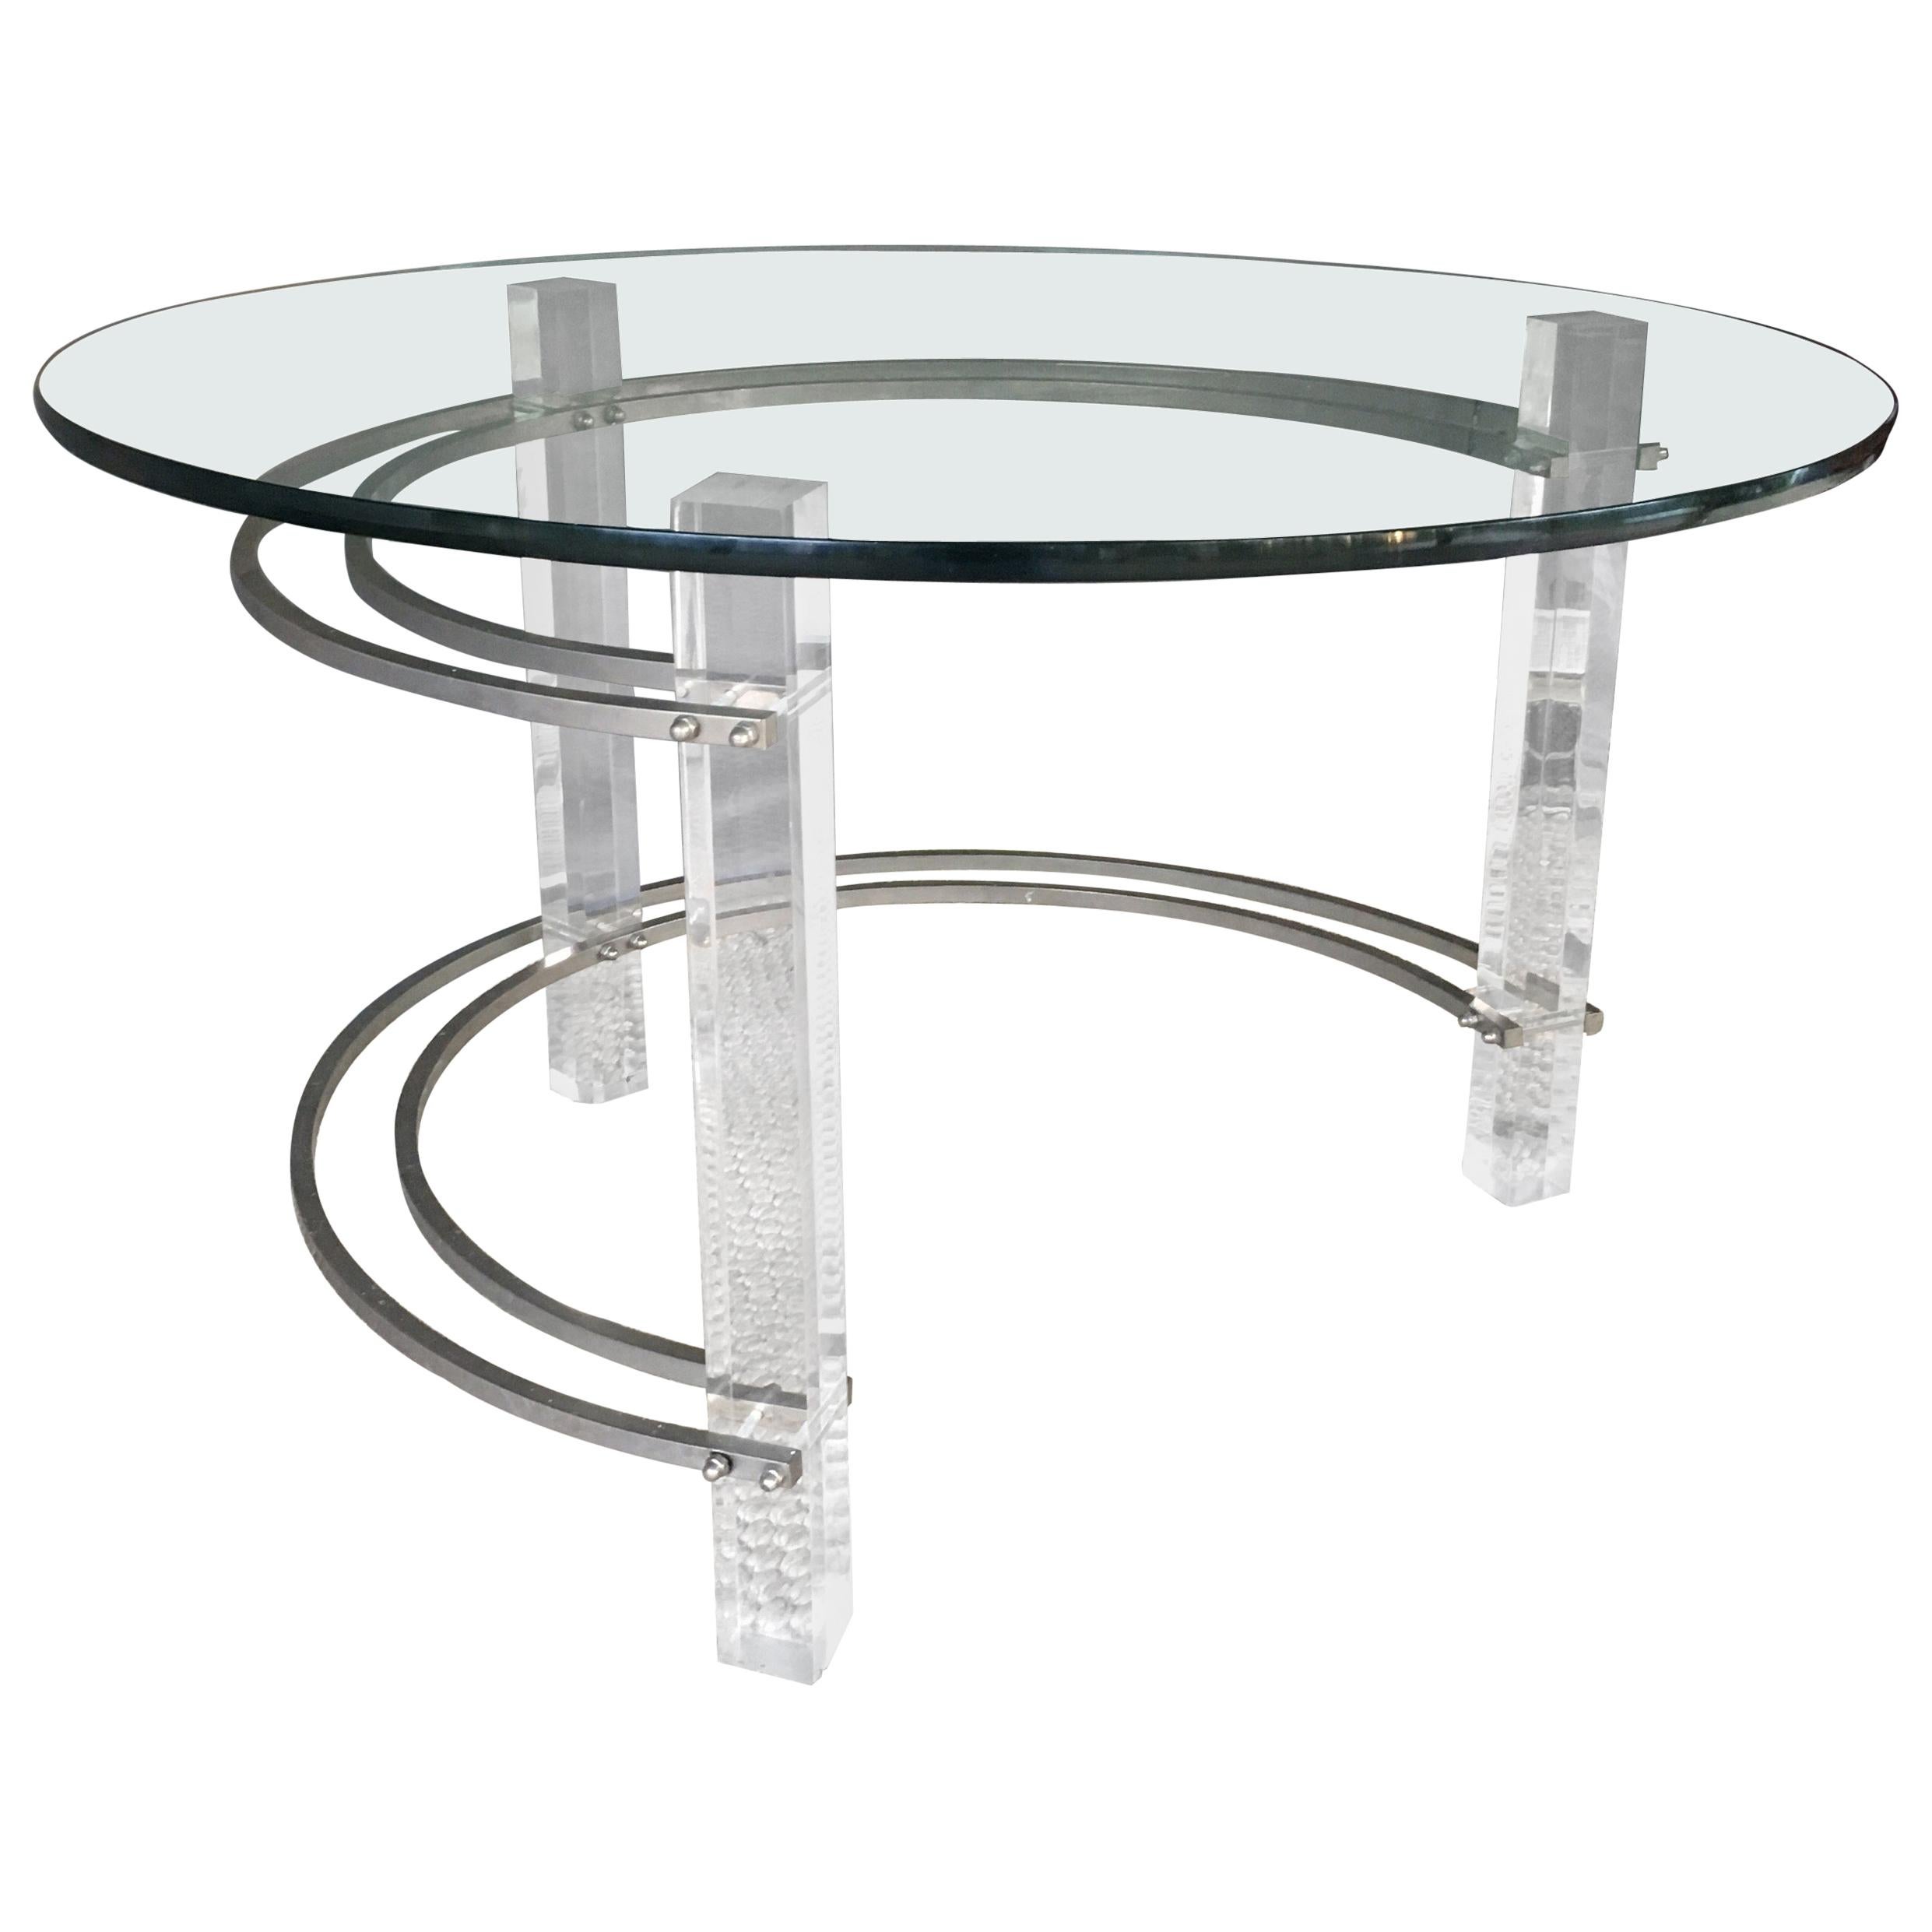 Late 20th Century Lucite, Chrome and Glass Coffee Table by Charles Hollis Jones